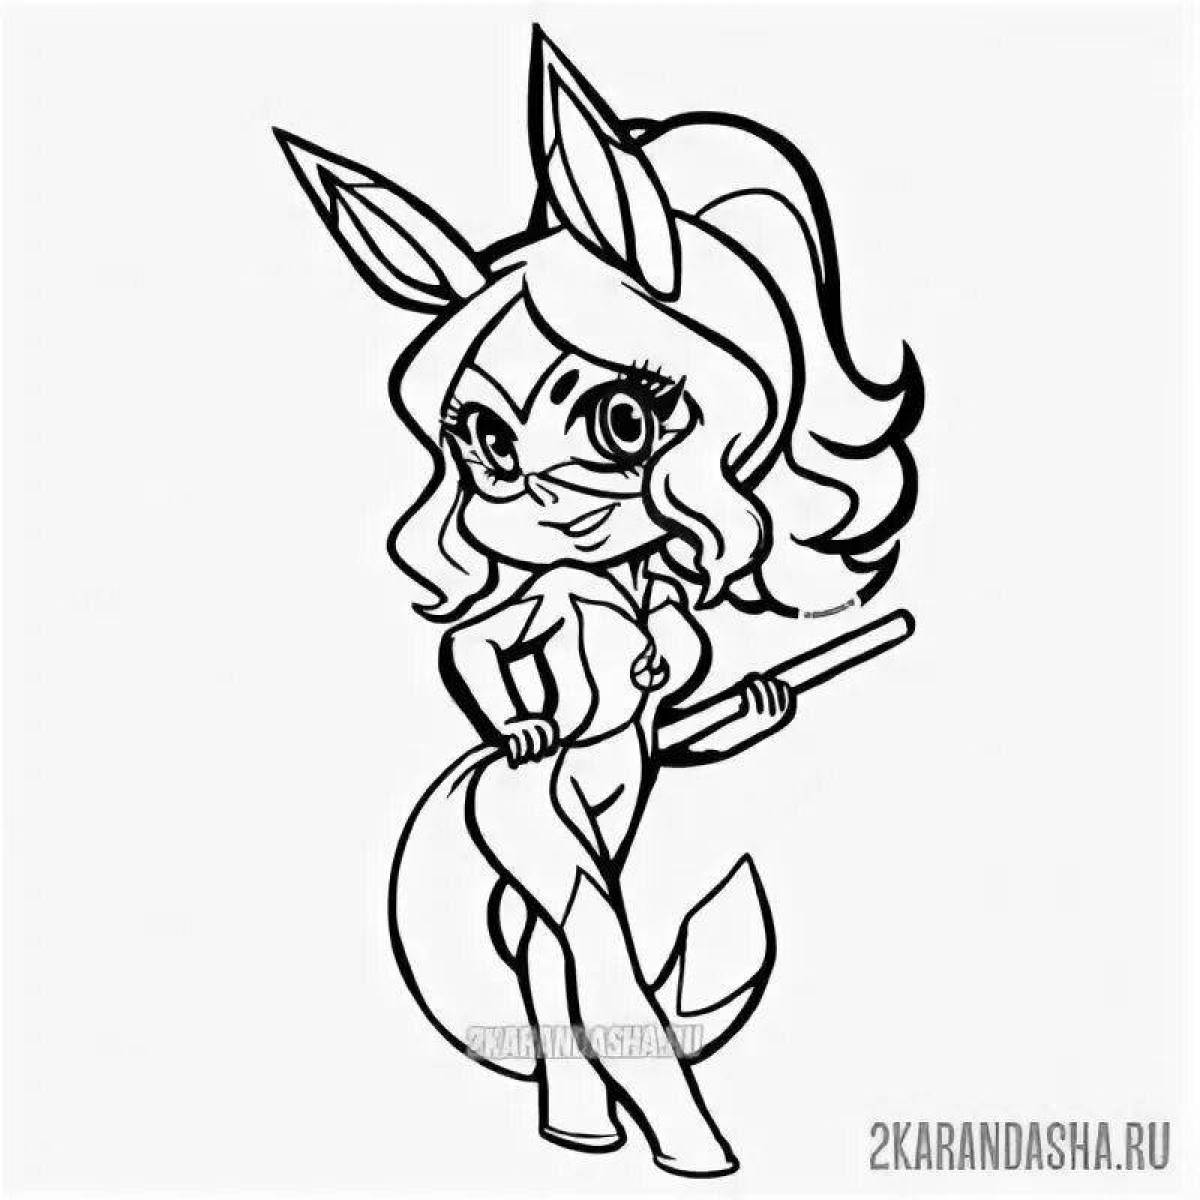 Rina Rouge's adorable coloring page